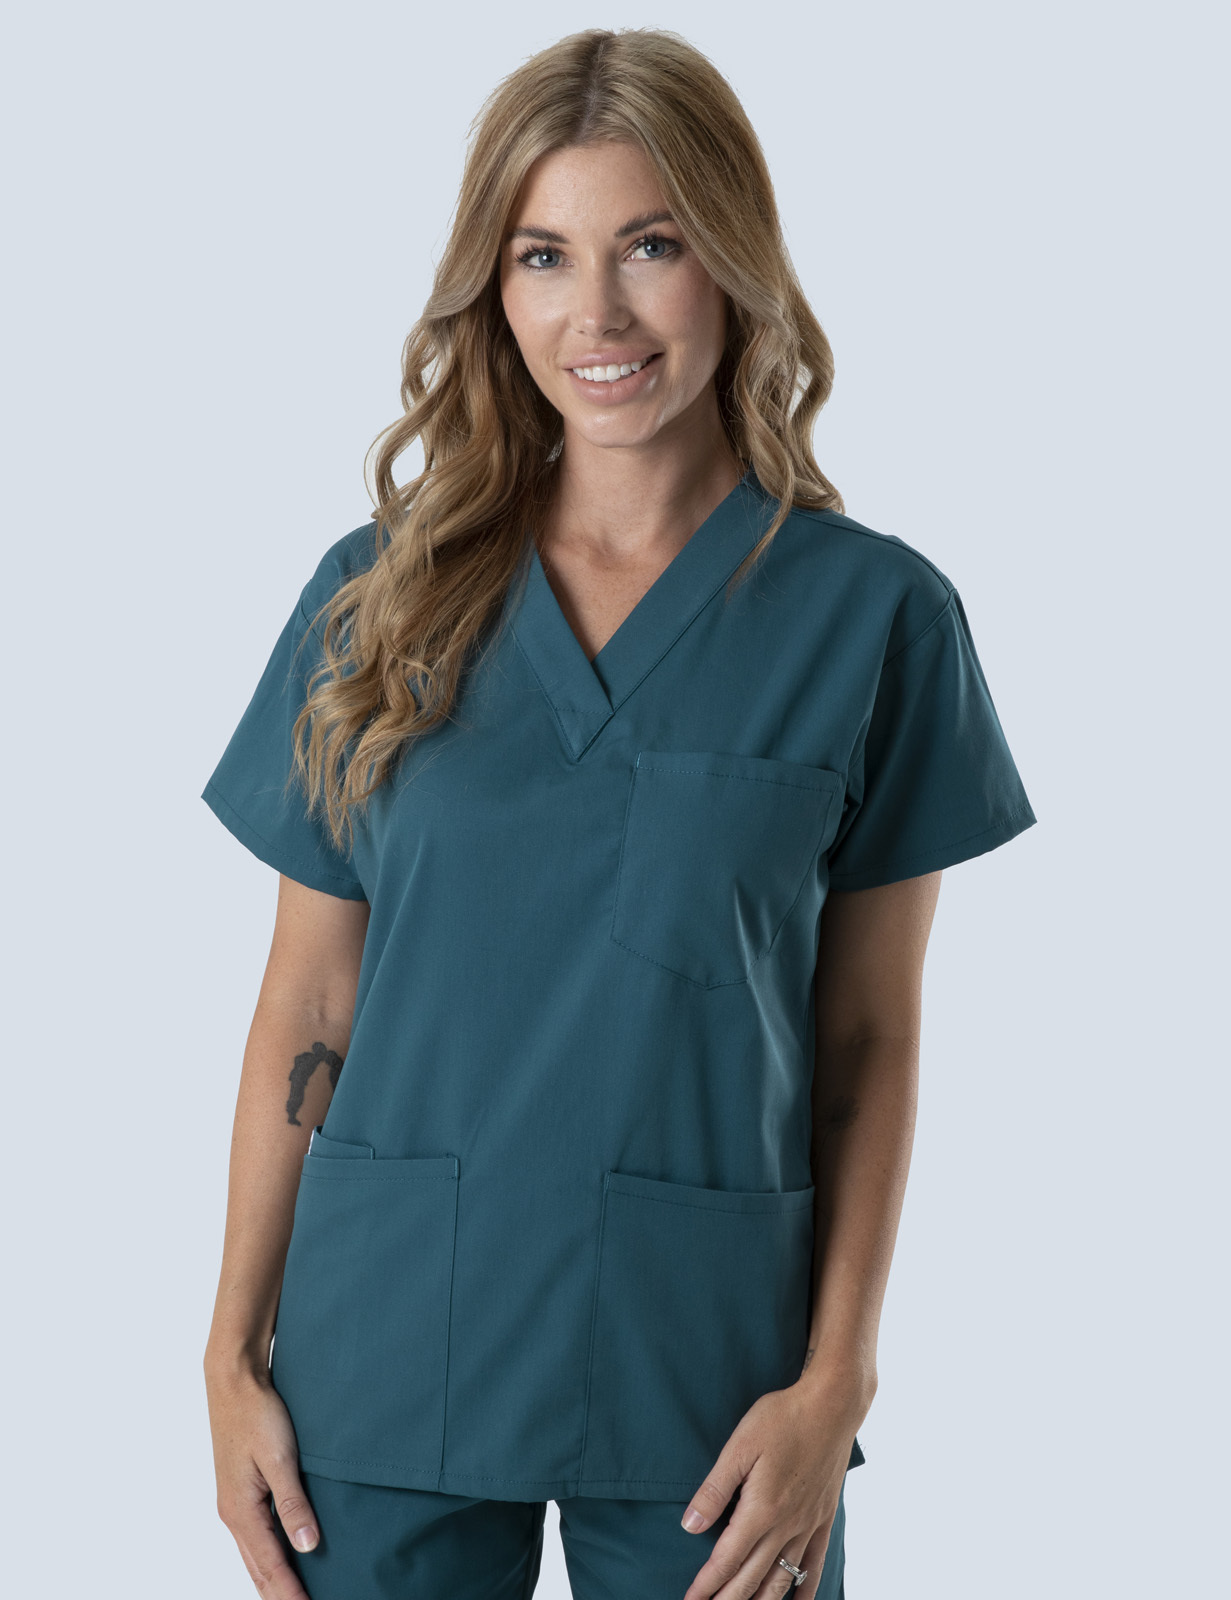 Canberra Hospital - Physiotherapy Admin (4 Pocket top in Caribbean incl Logos)